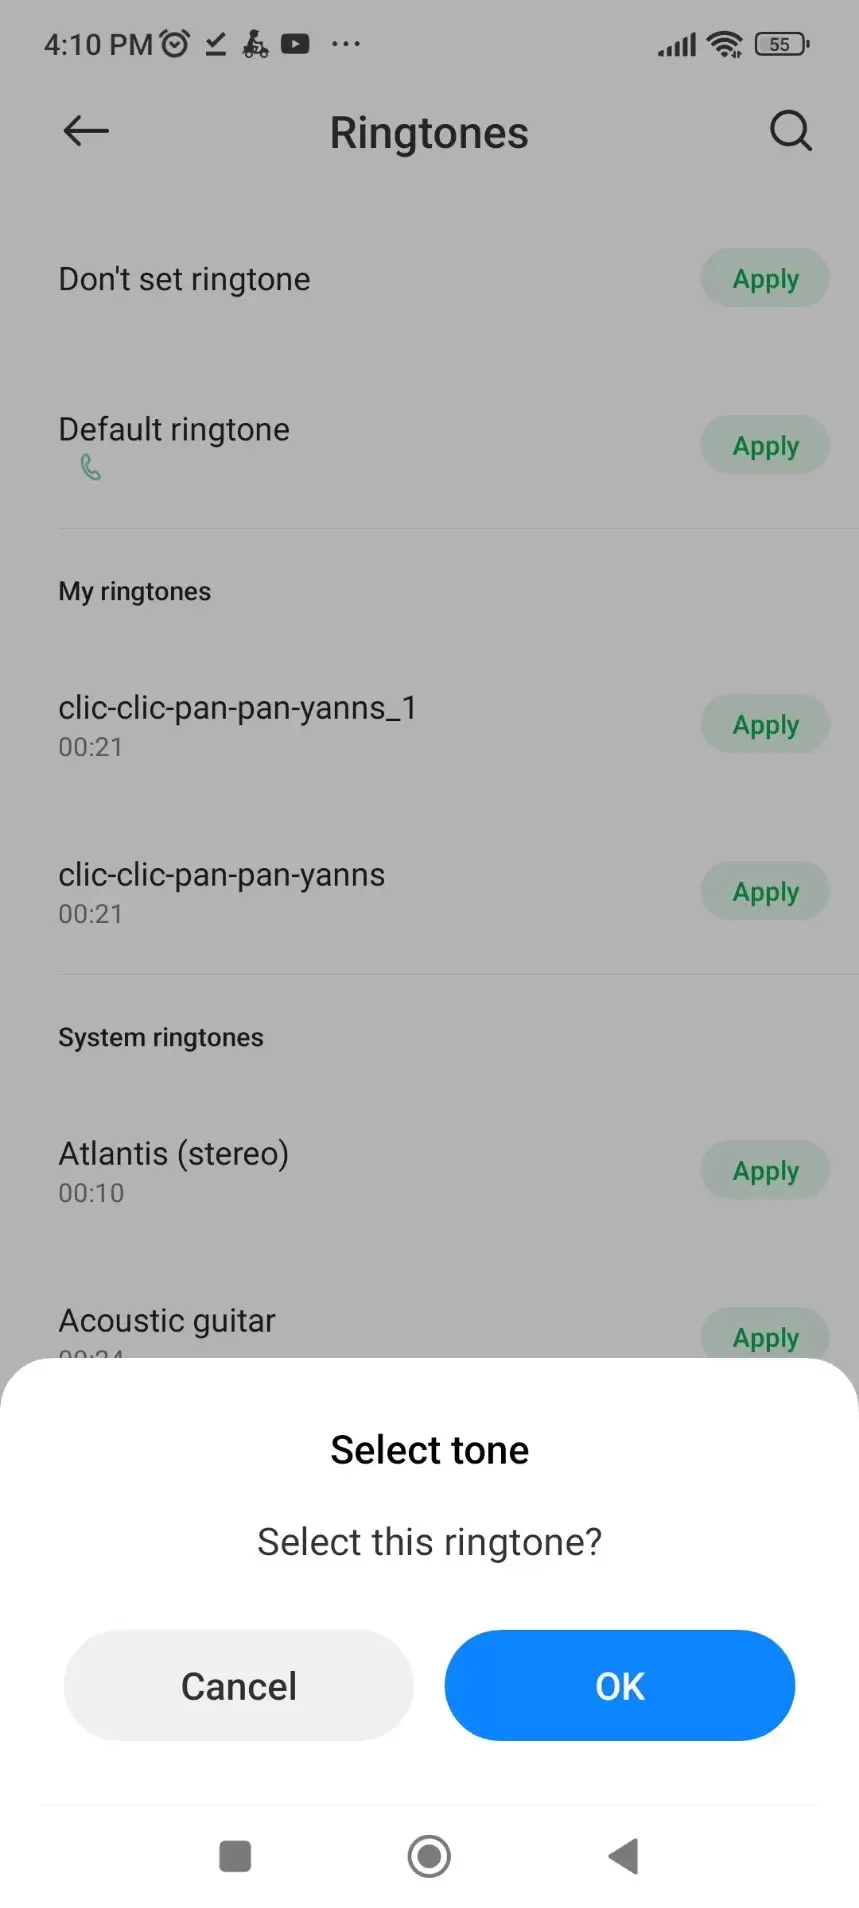 How To Download Ringtones On Android